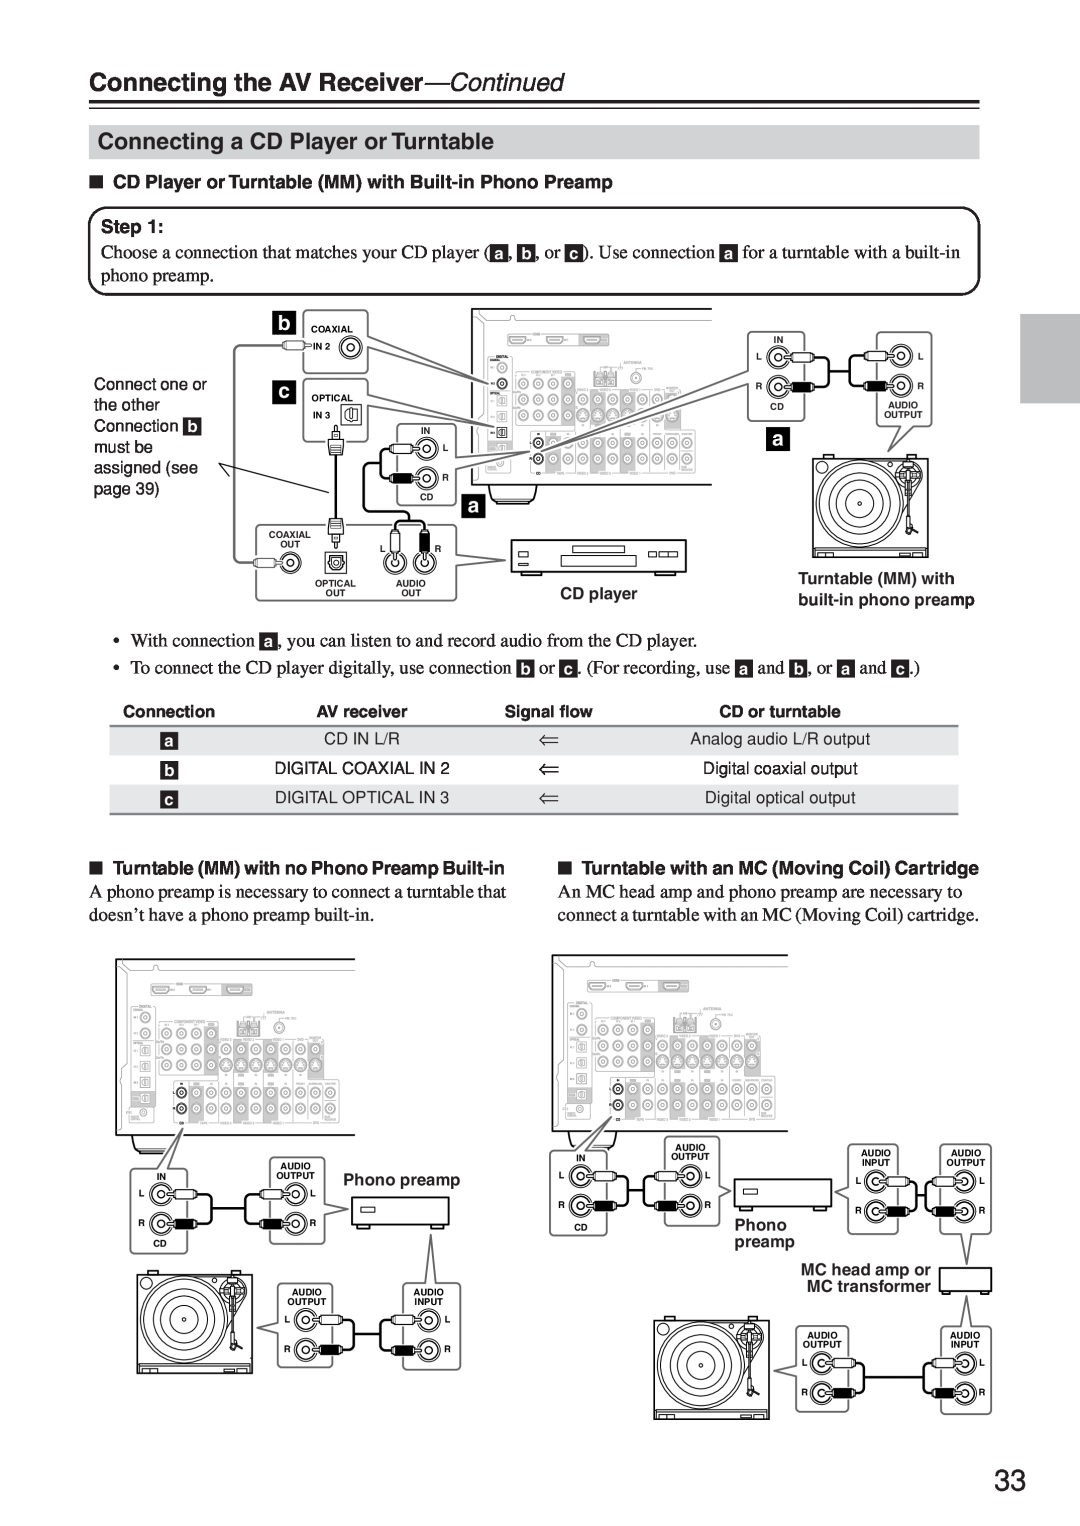 Onkyo HT-R640 instruction manual Connecting a CD Player or Turntable, Connecting the AV Receiver-Continued 